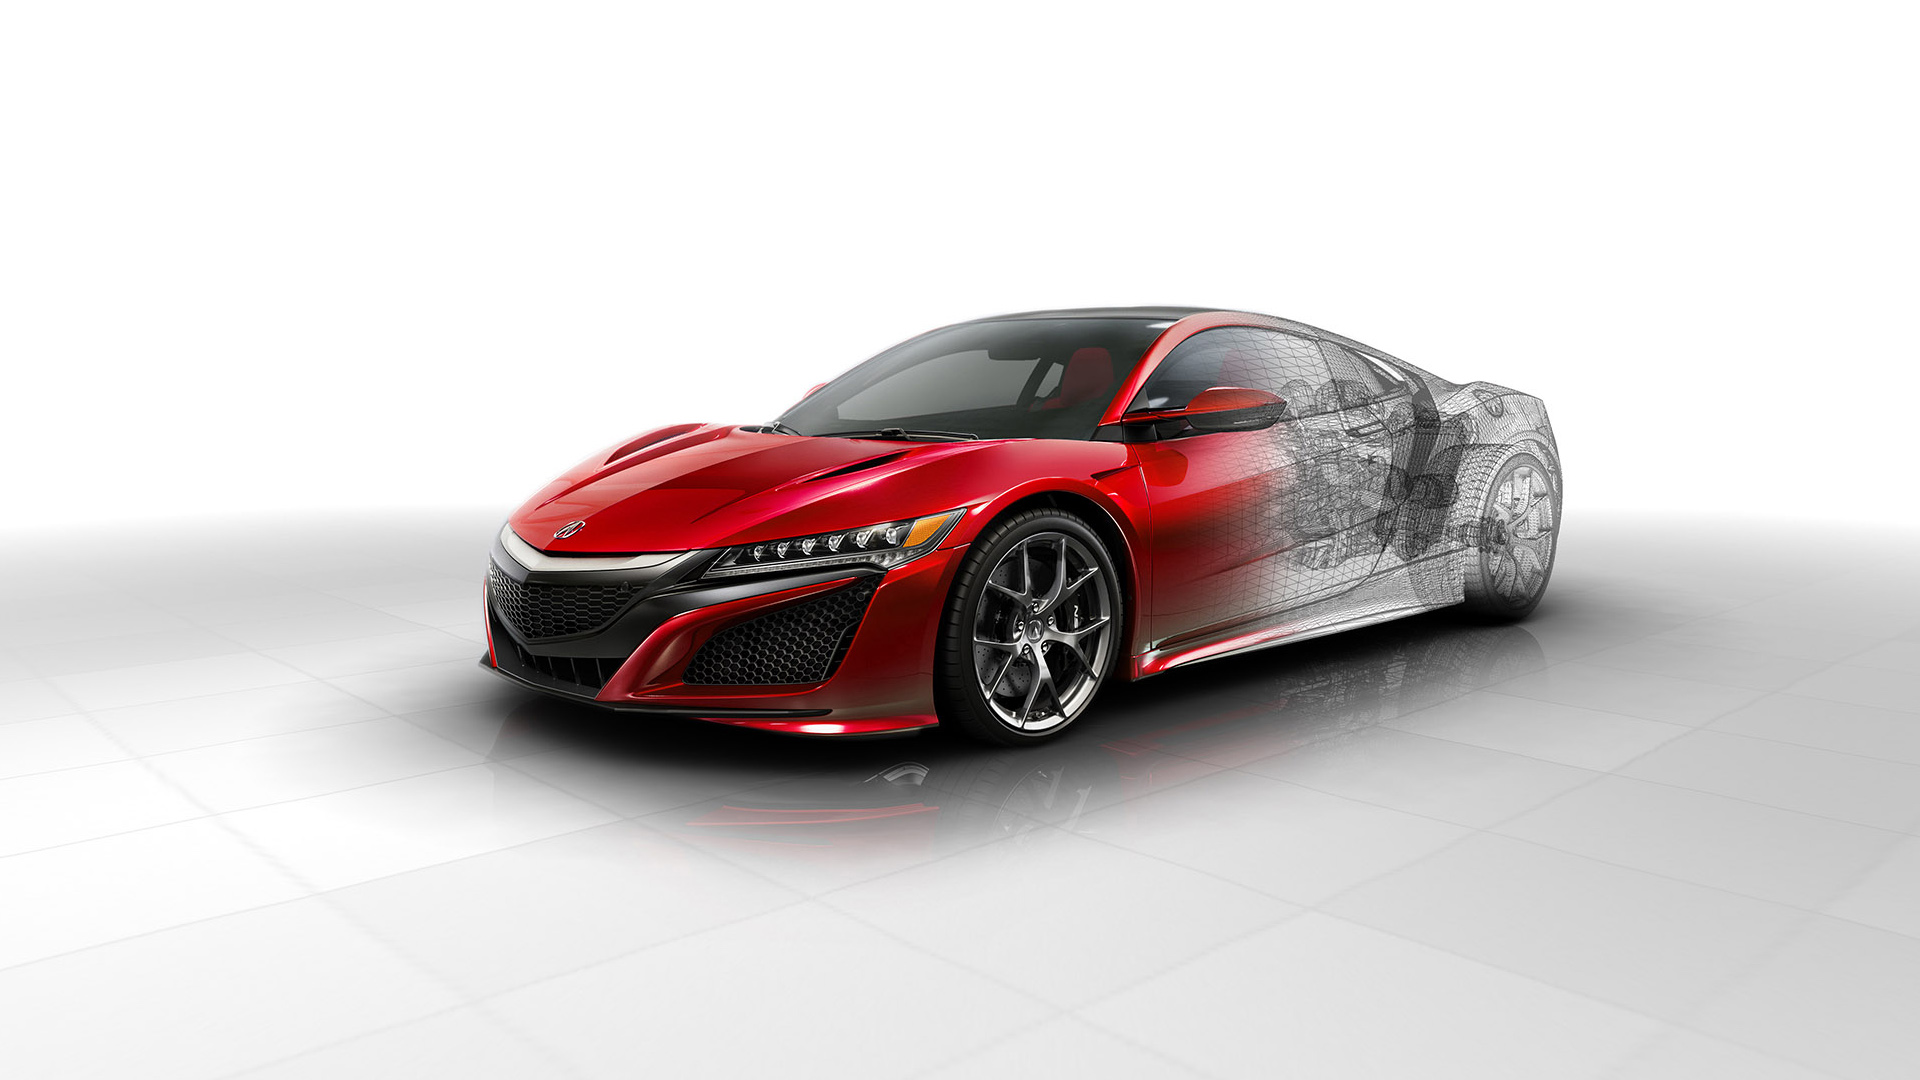 2016 Acura NSX Technical Wallpaper | HD Car Wallpapers